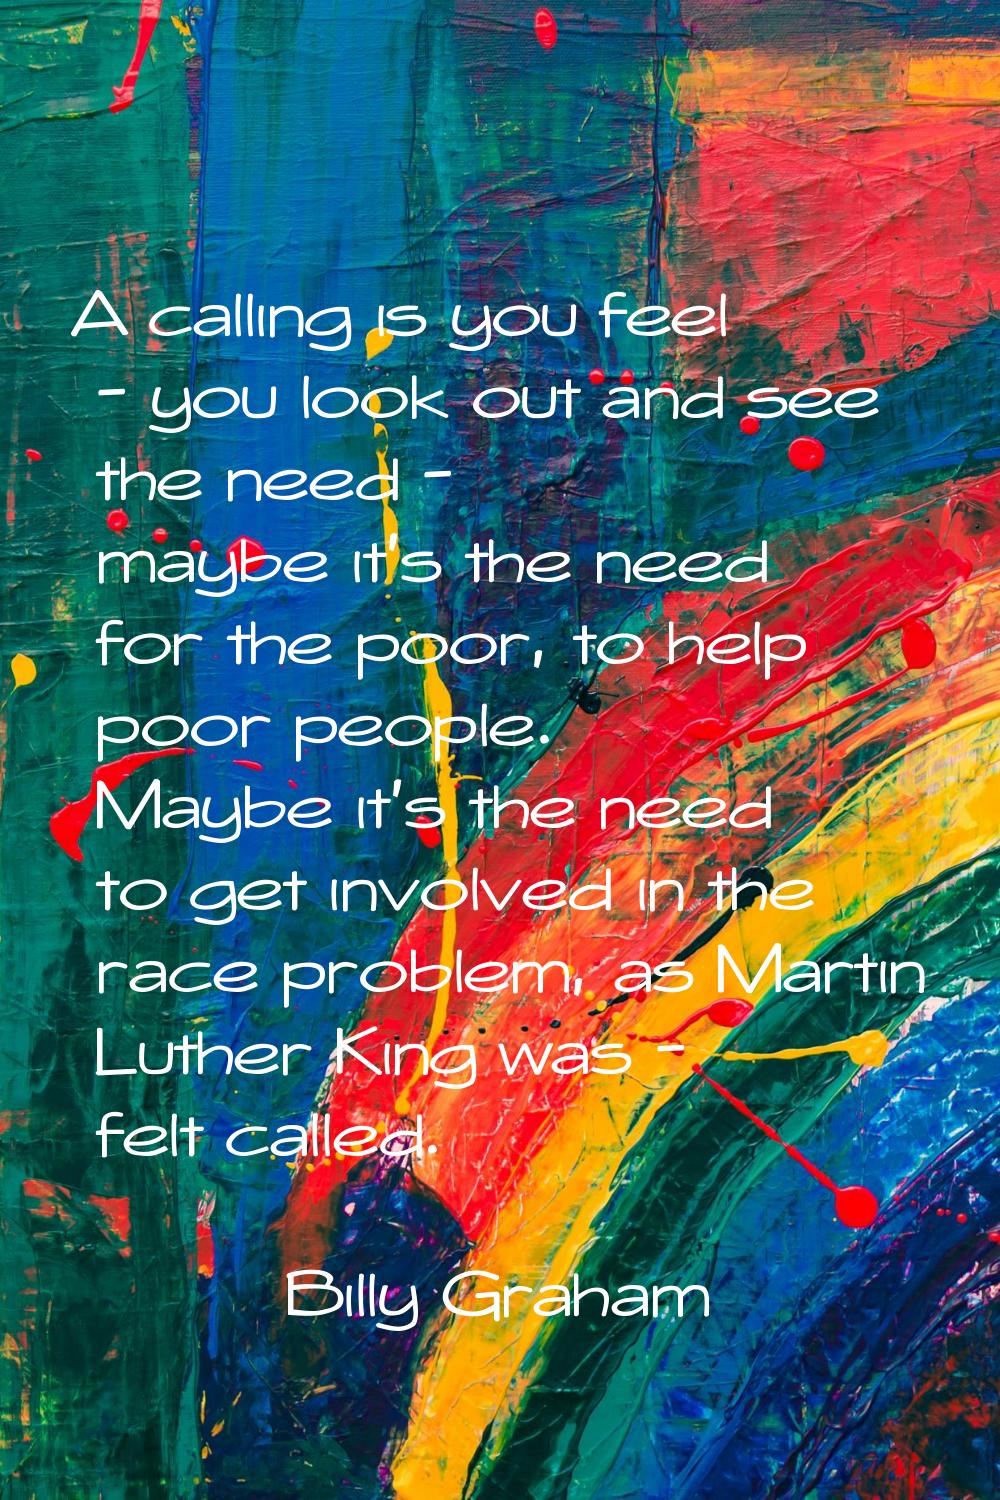 A calling is you feel - you look out and see the need - maybe it's the need for the poor, to help p